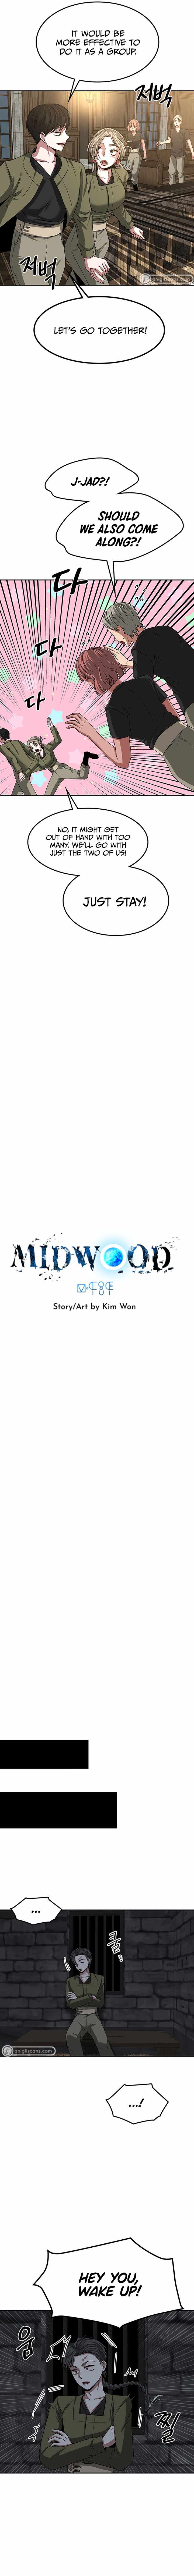 Midwood chapter 10 - page 6